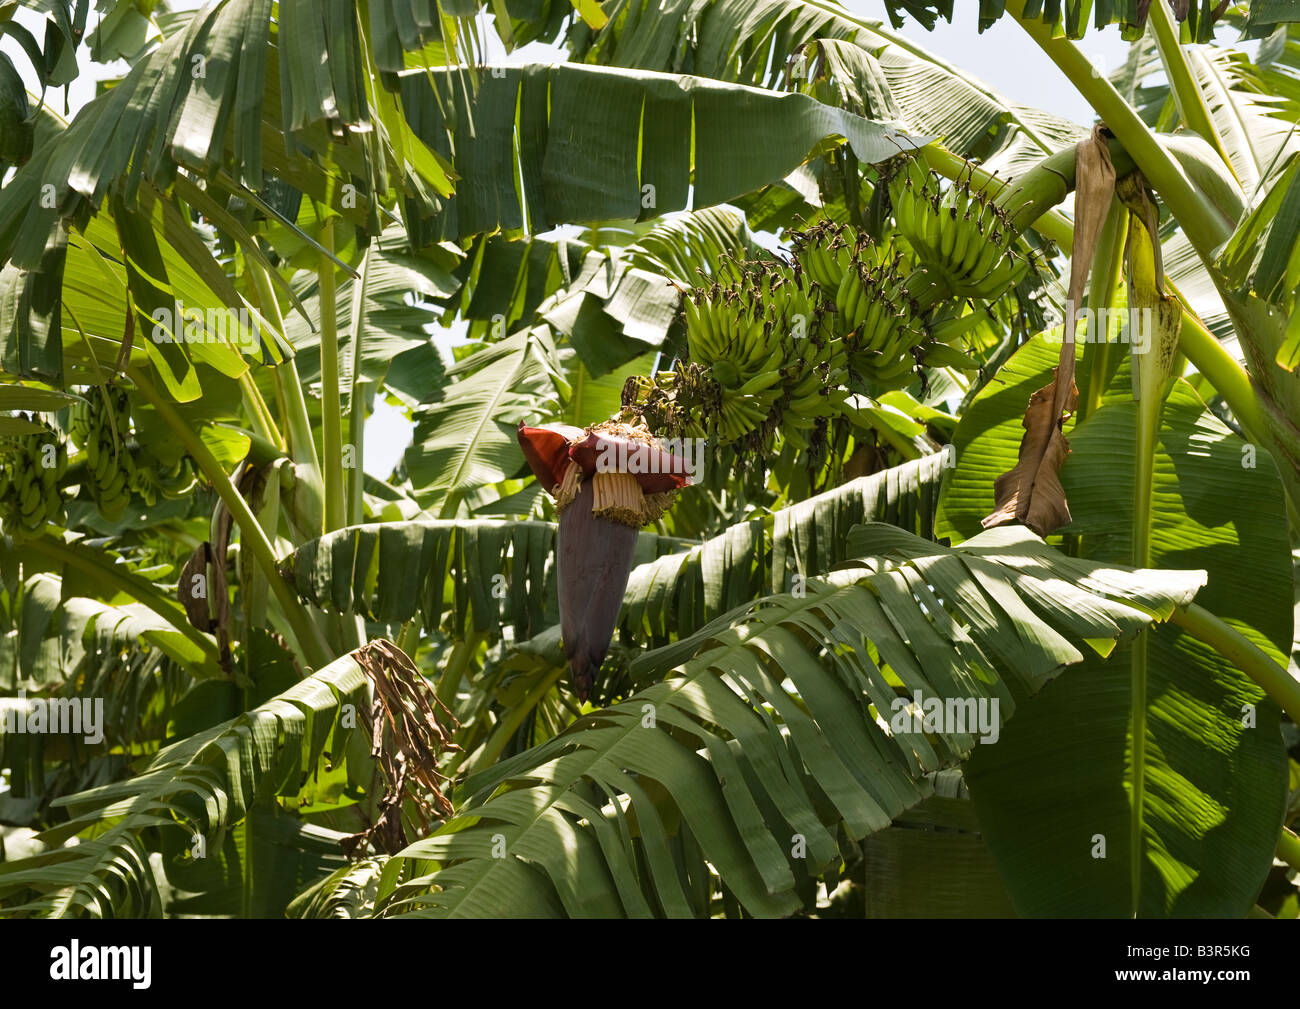 Long and torn banana leaves and hanging clusters of fruits with its attractive banana heart growing on its stem of the tree. Stock Photo